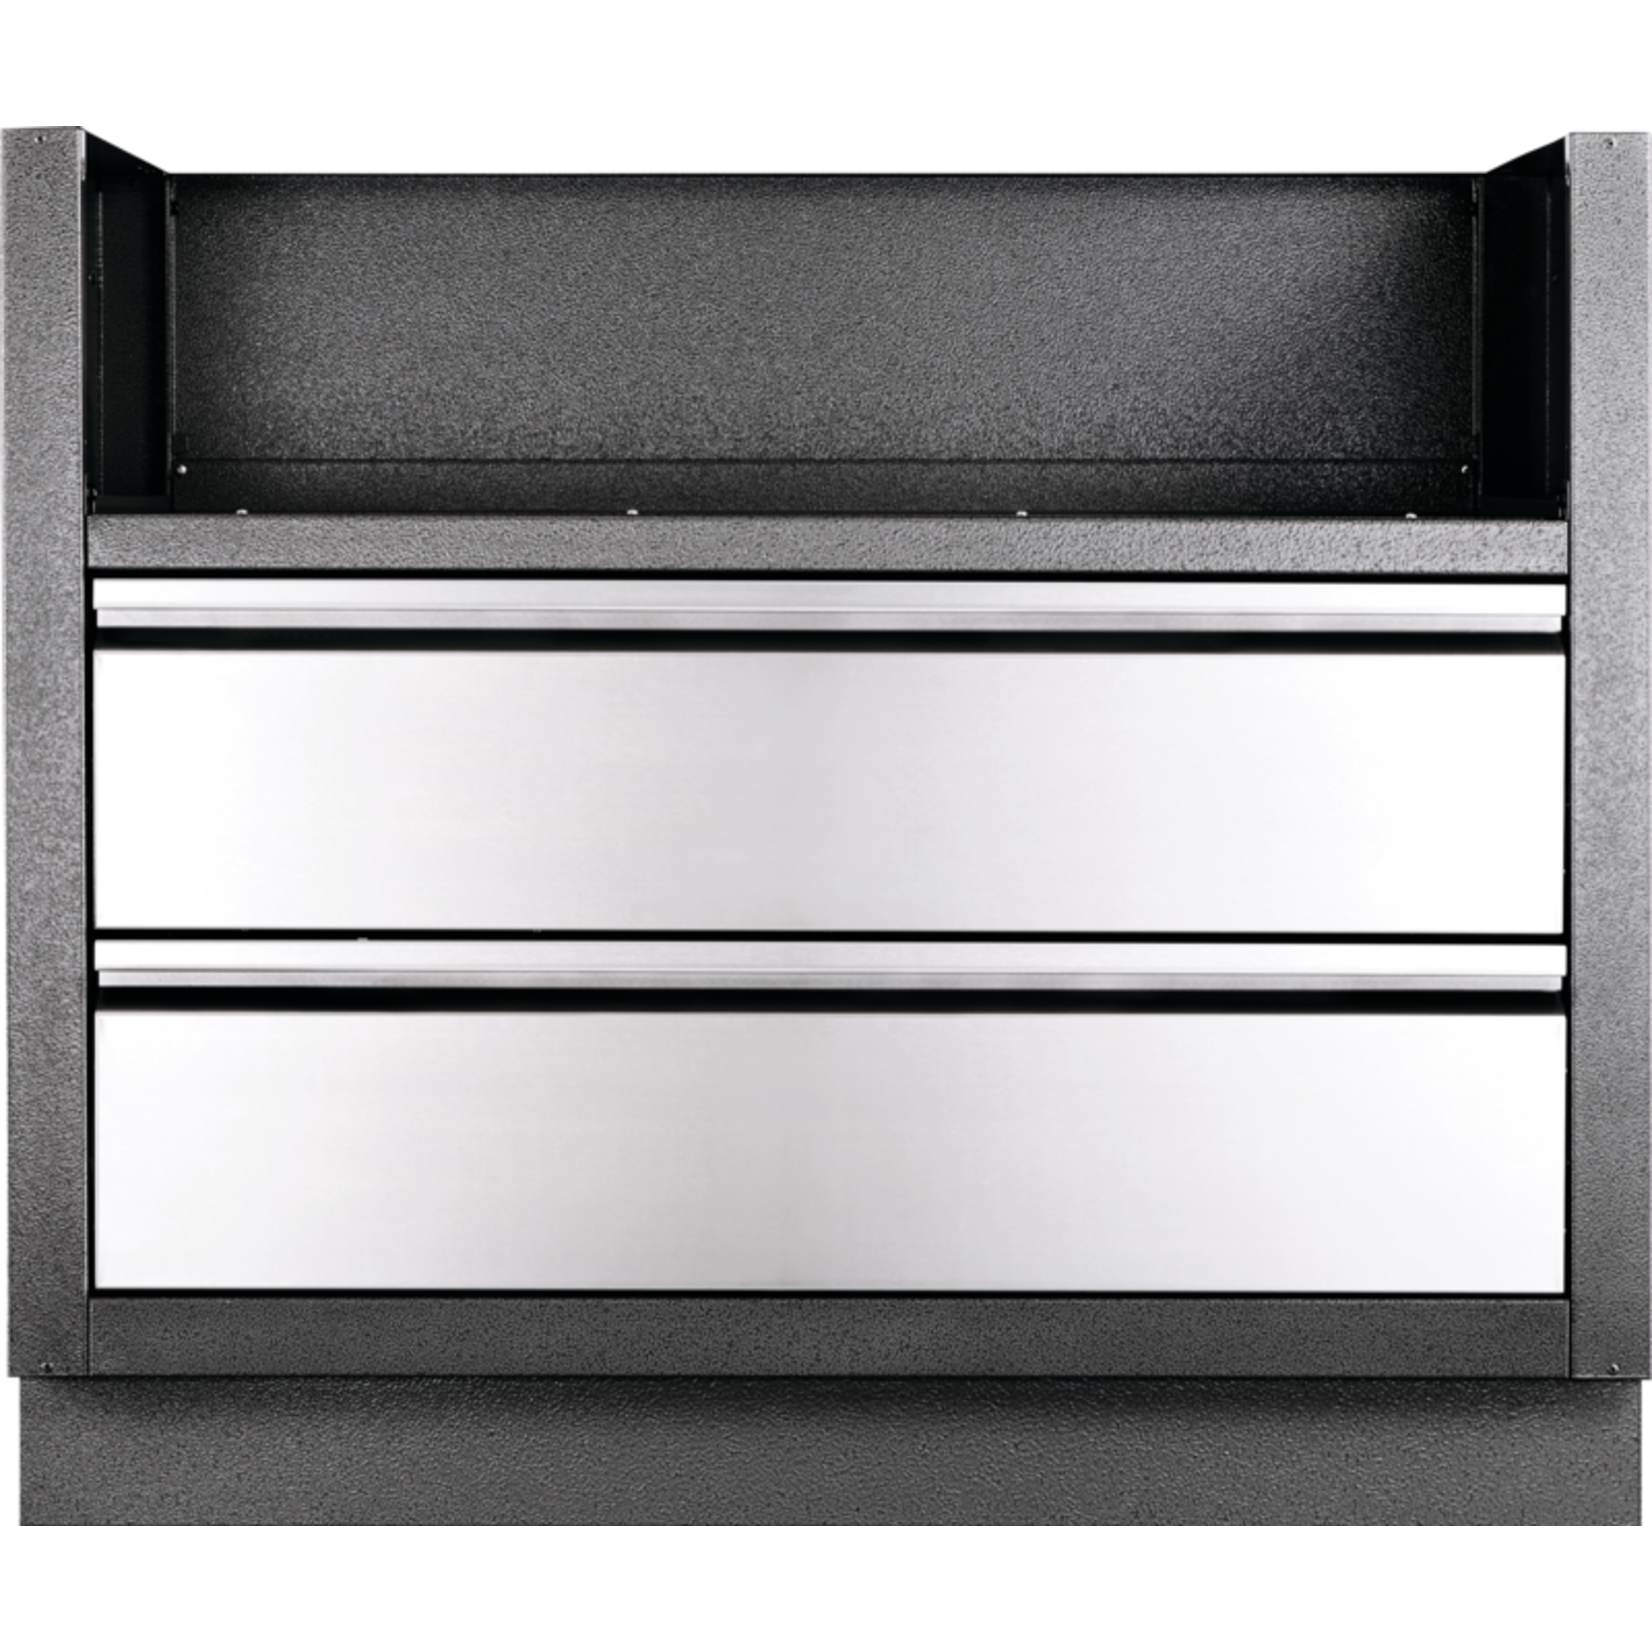 Napoleon OASIS™ Under Grill Cabinet for Built-in 700 Series 38